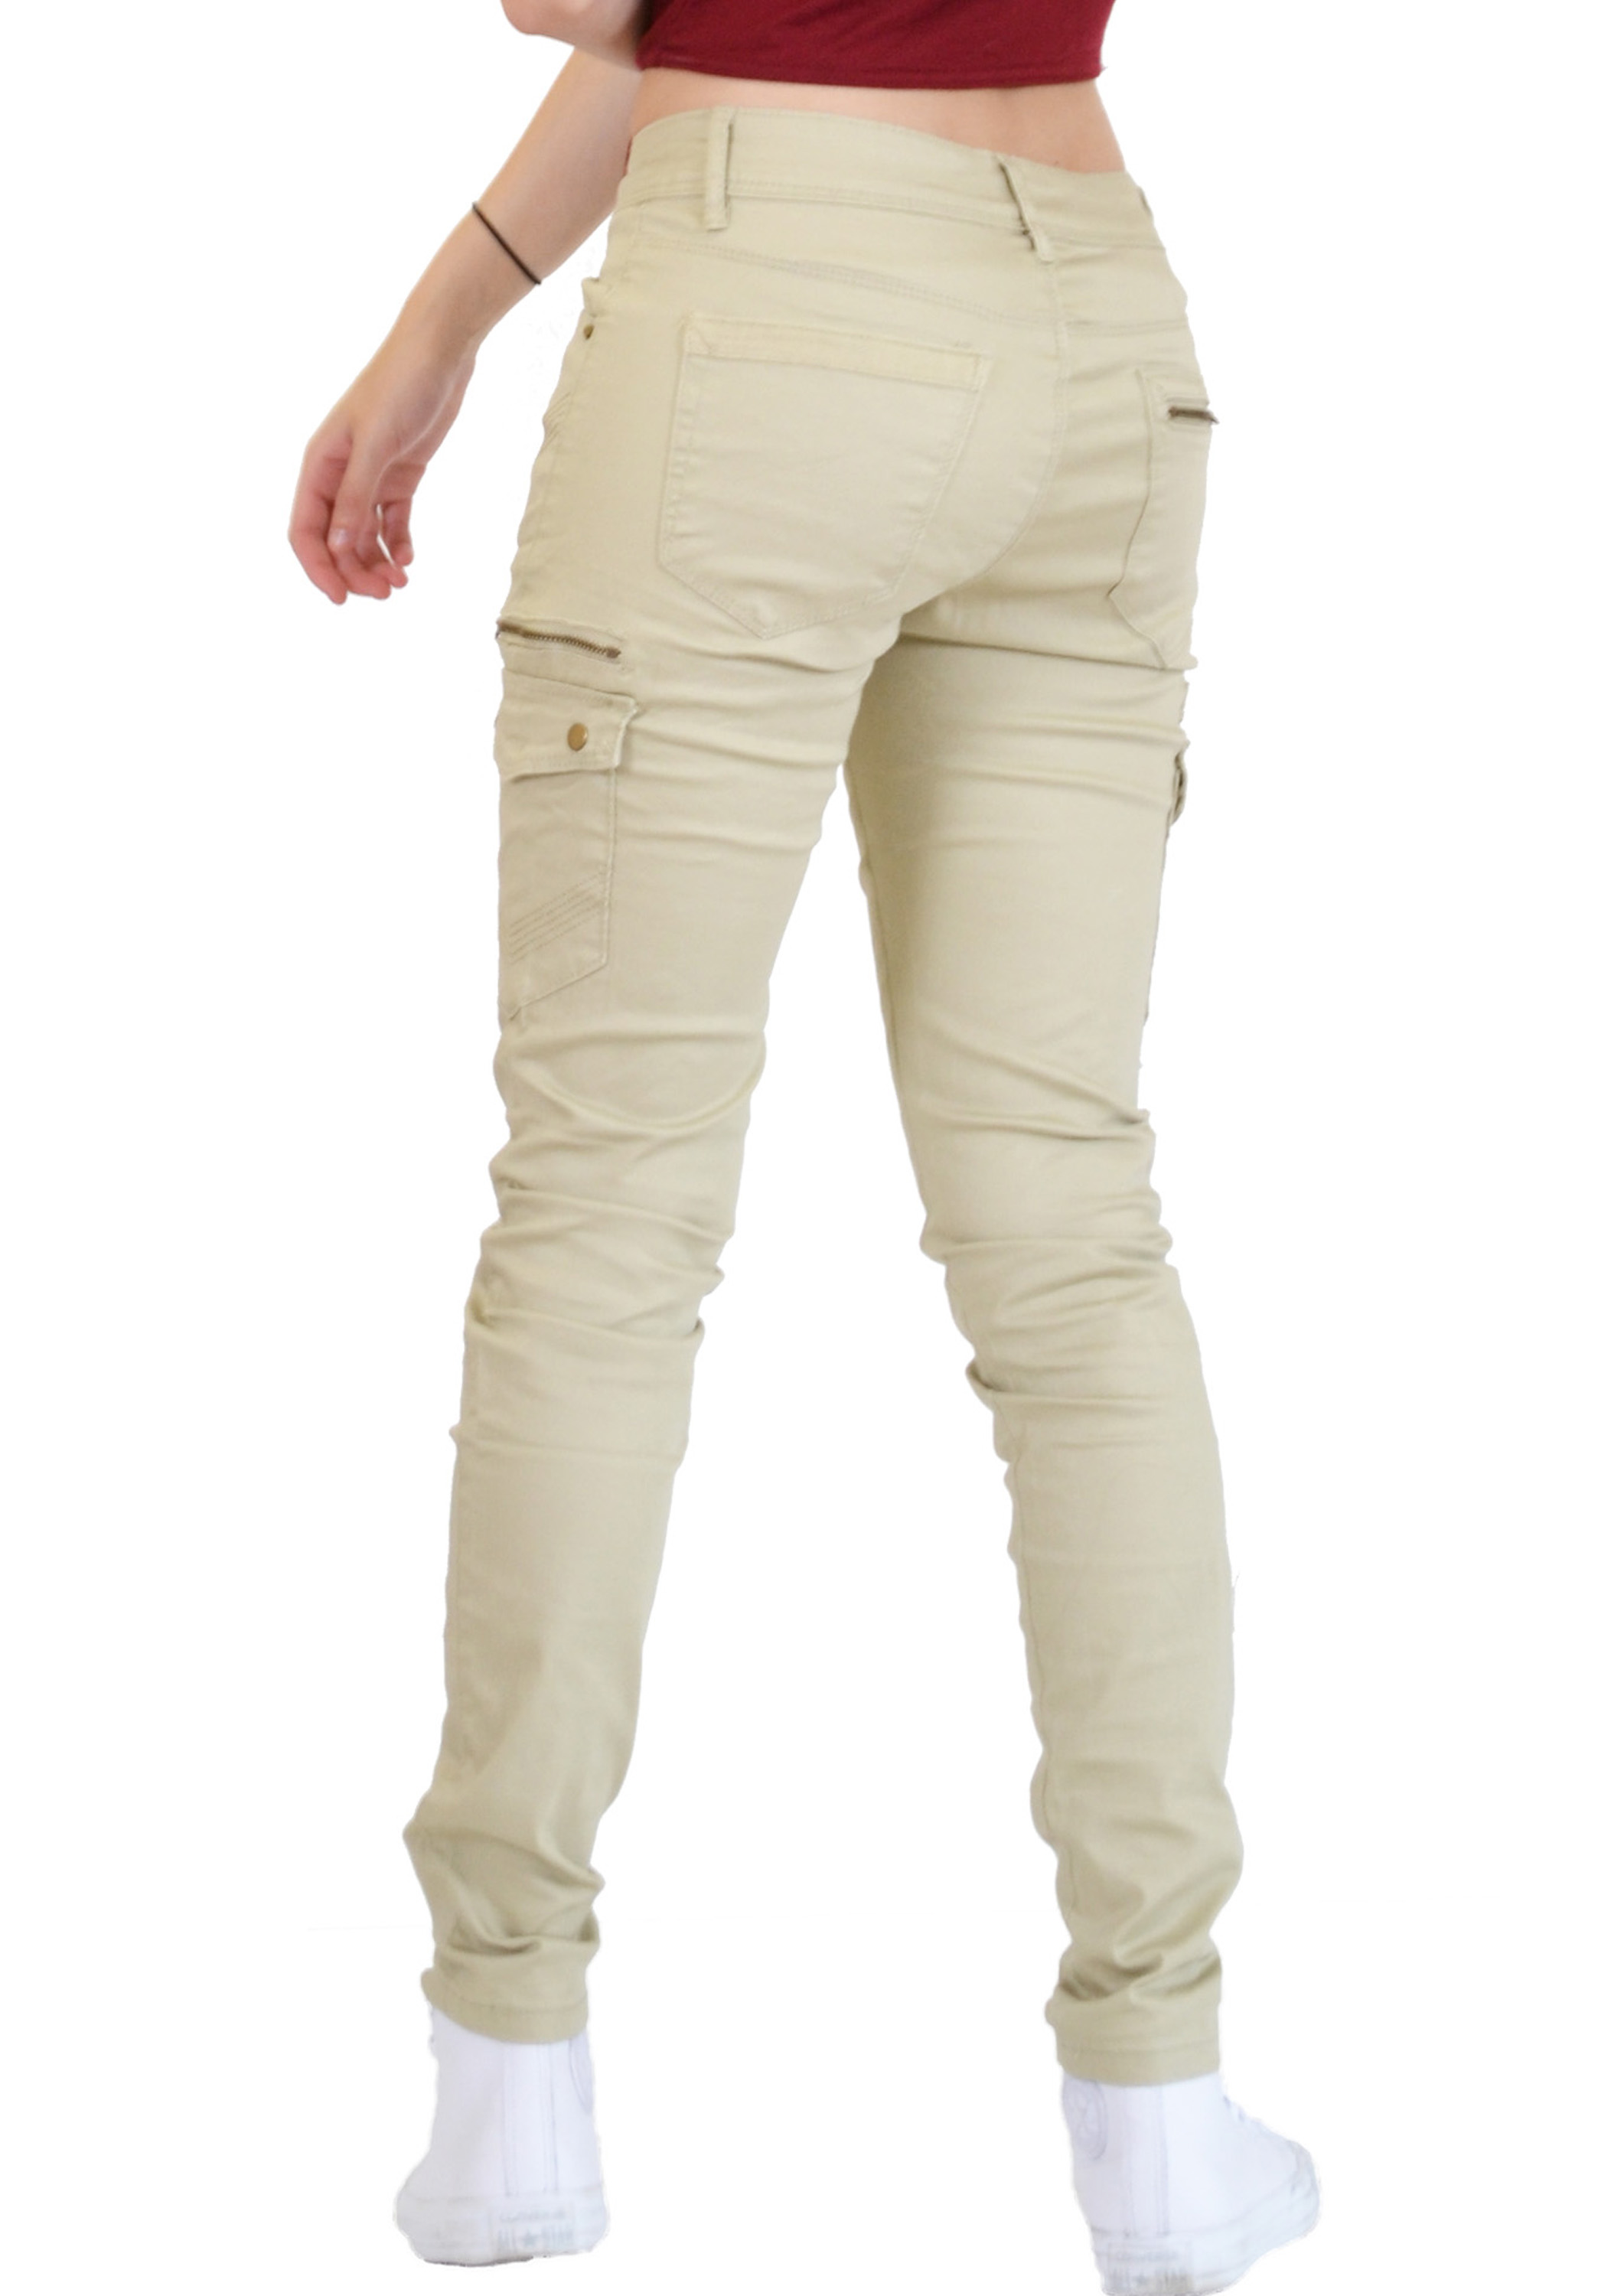 New Ladies Womens Slim Fitted Stretch Combat Jeans Pants Skinny Cargo ...